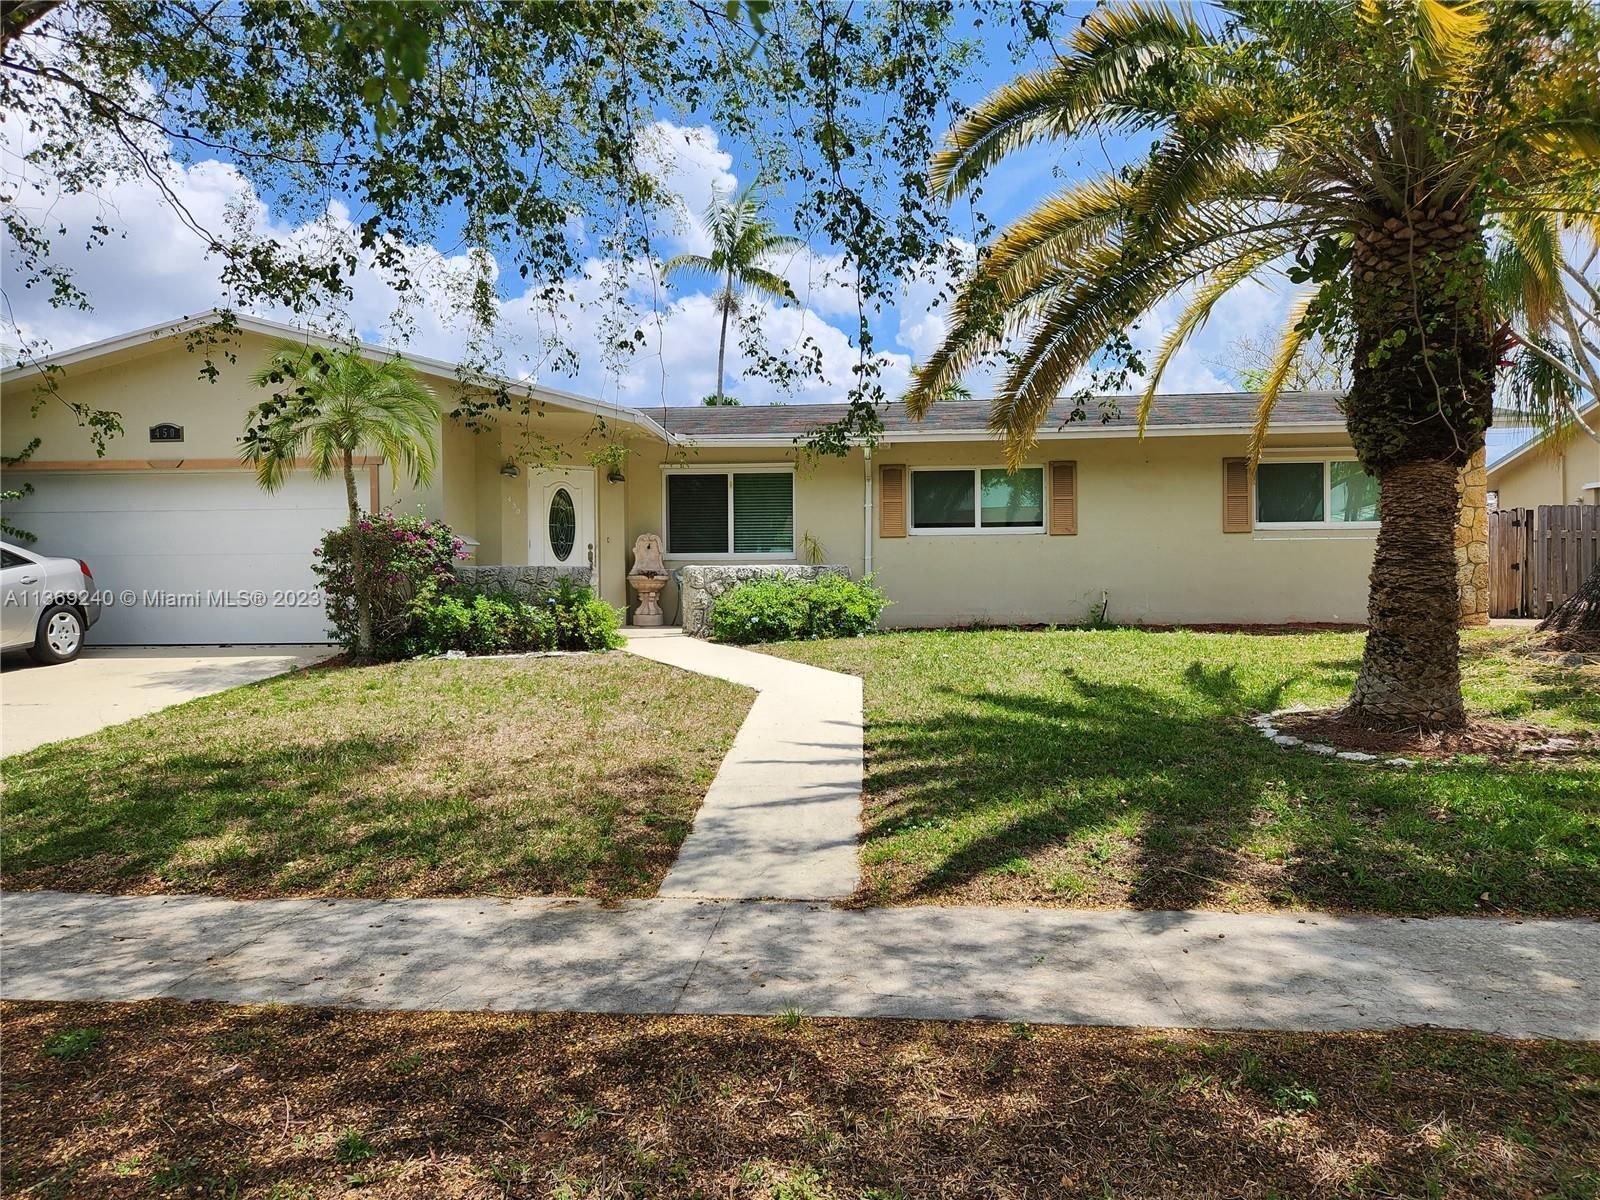 Real estate property located at 450 42nd Ave, Broward County, Coconut Creek, FL